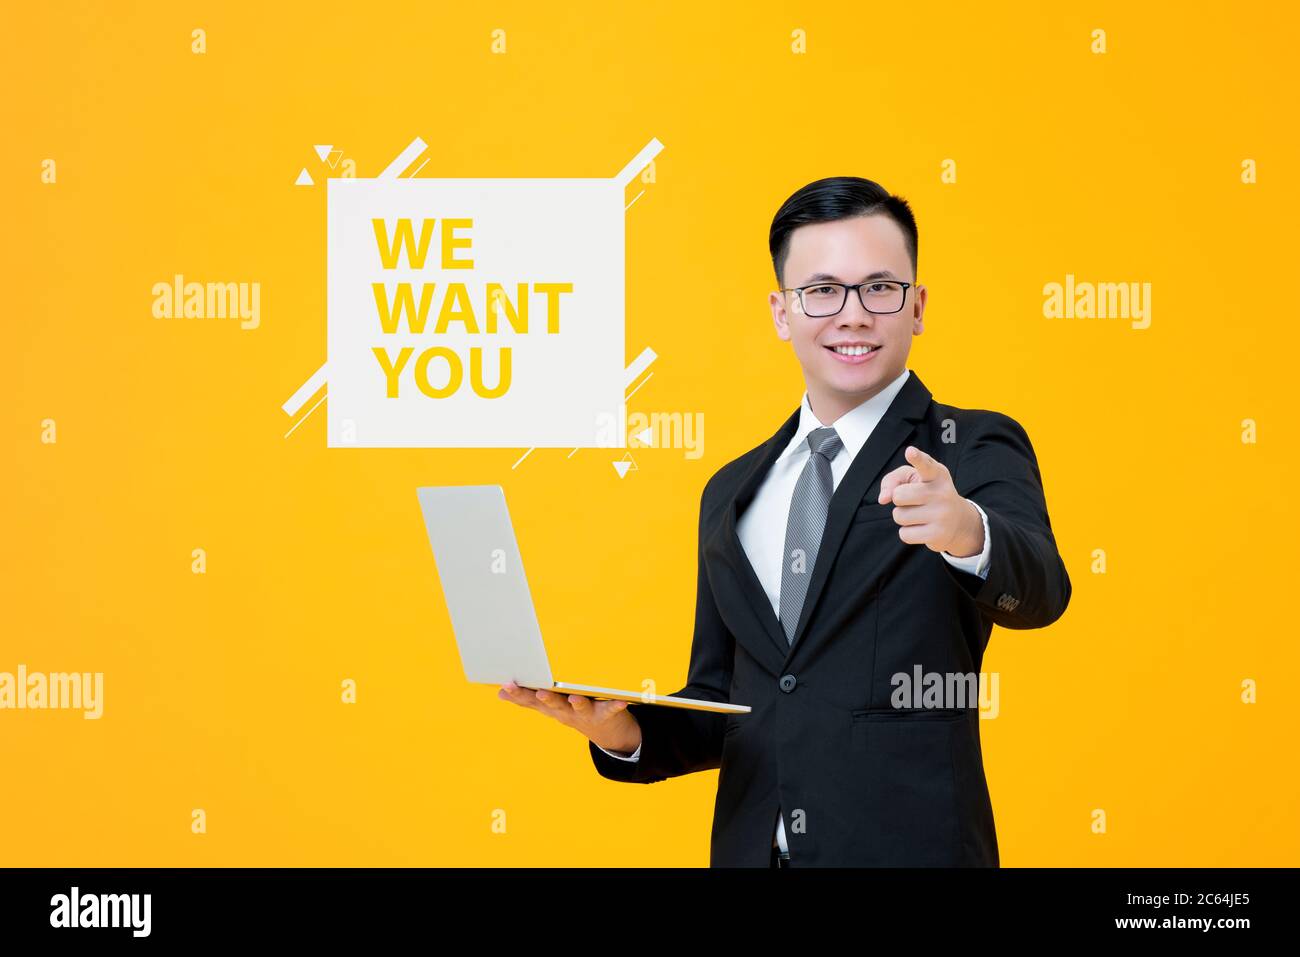 Job hiring concept portrait of smiling Asian businessman holding laptop computer while pointing hand on isolated yellow background with WE WANT YOU te Stock Photo